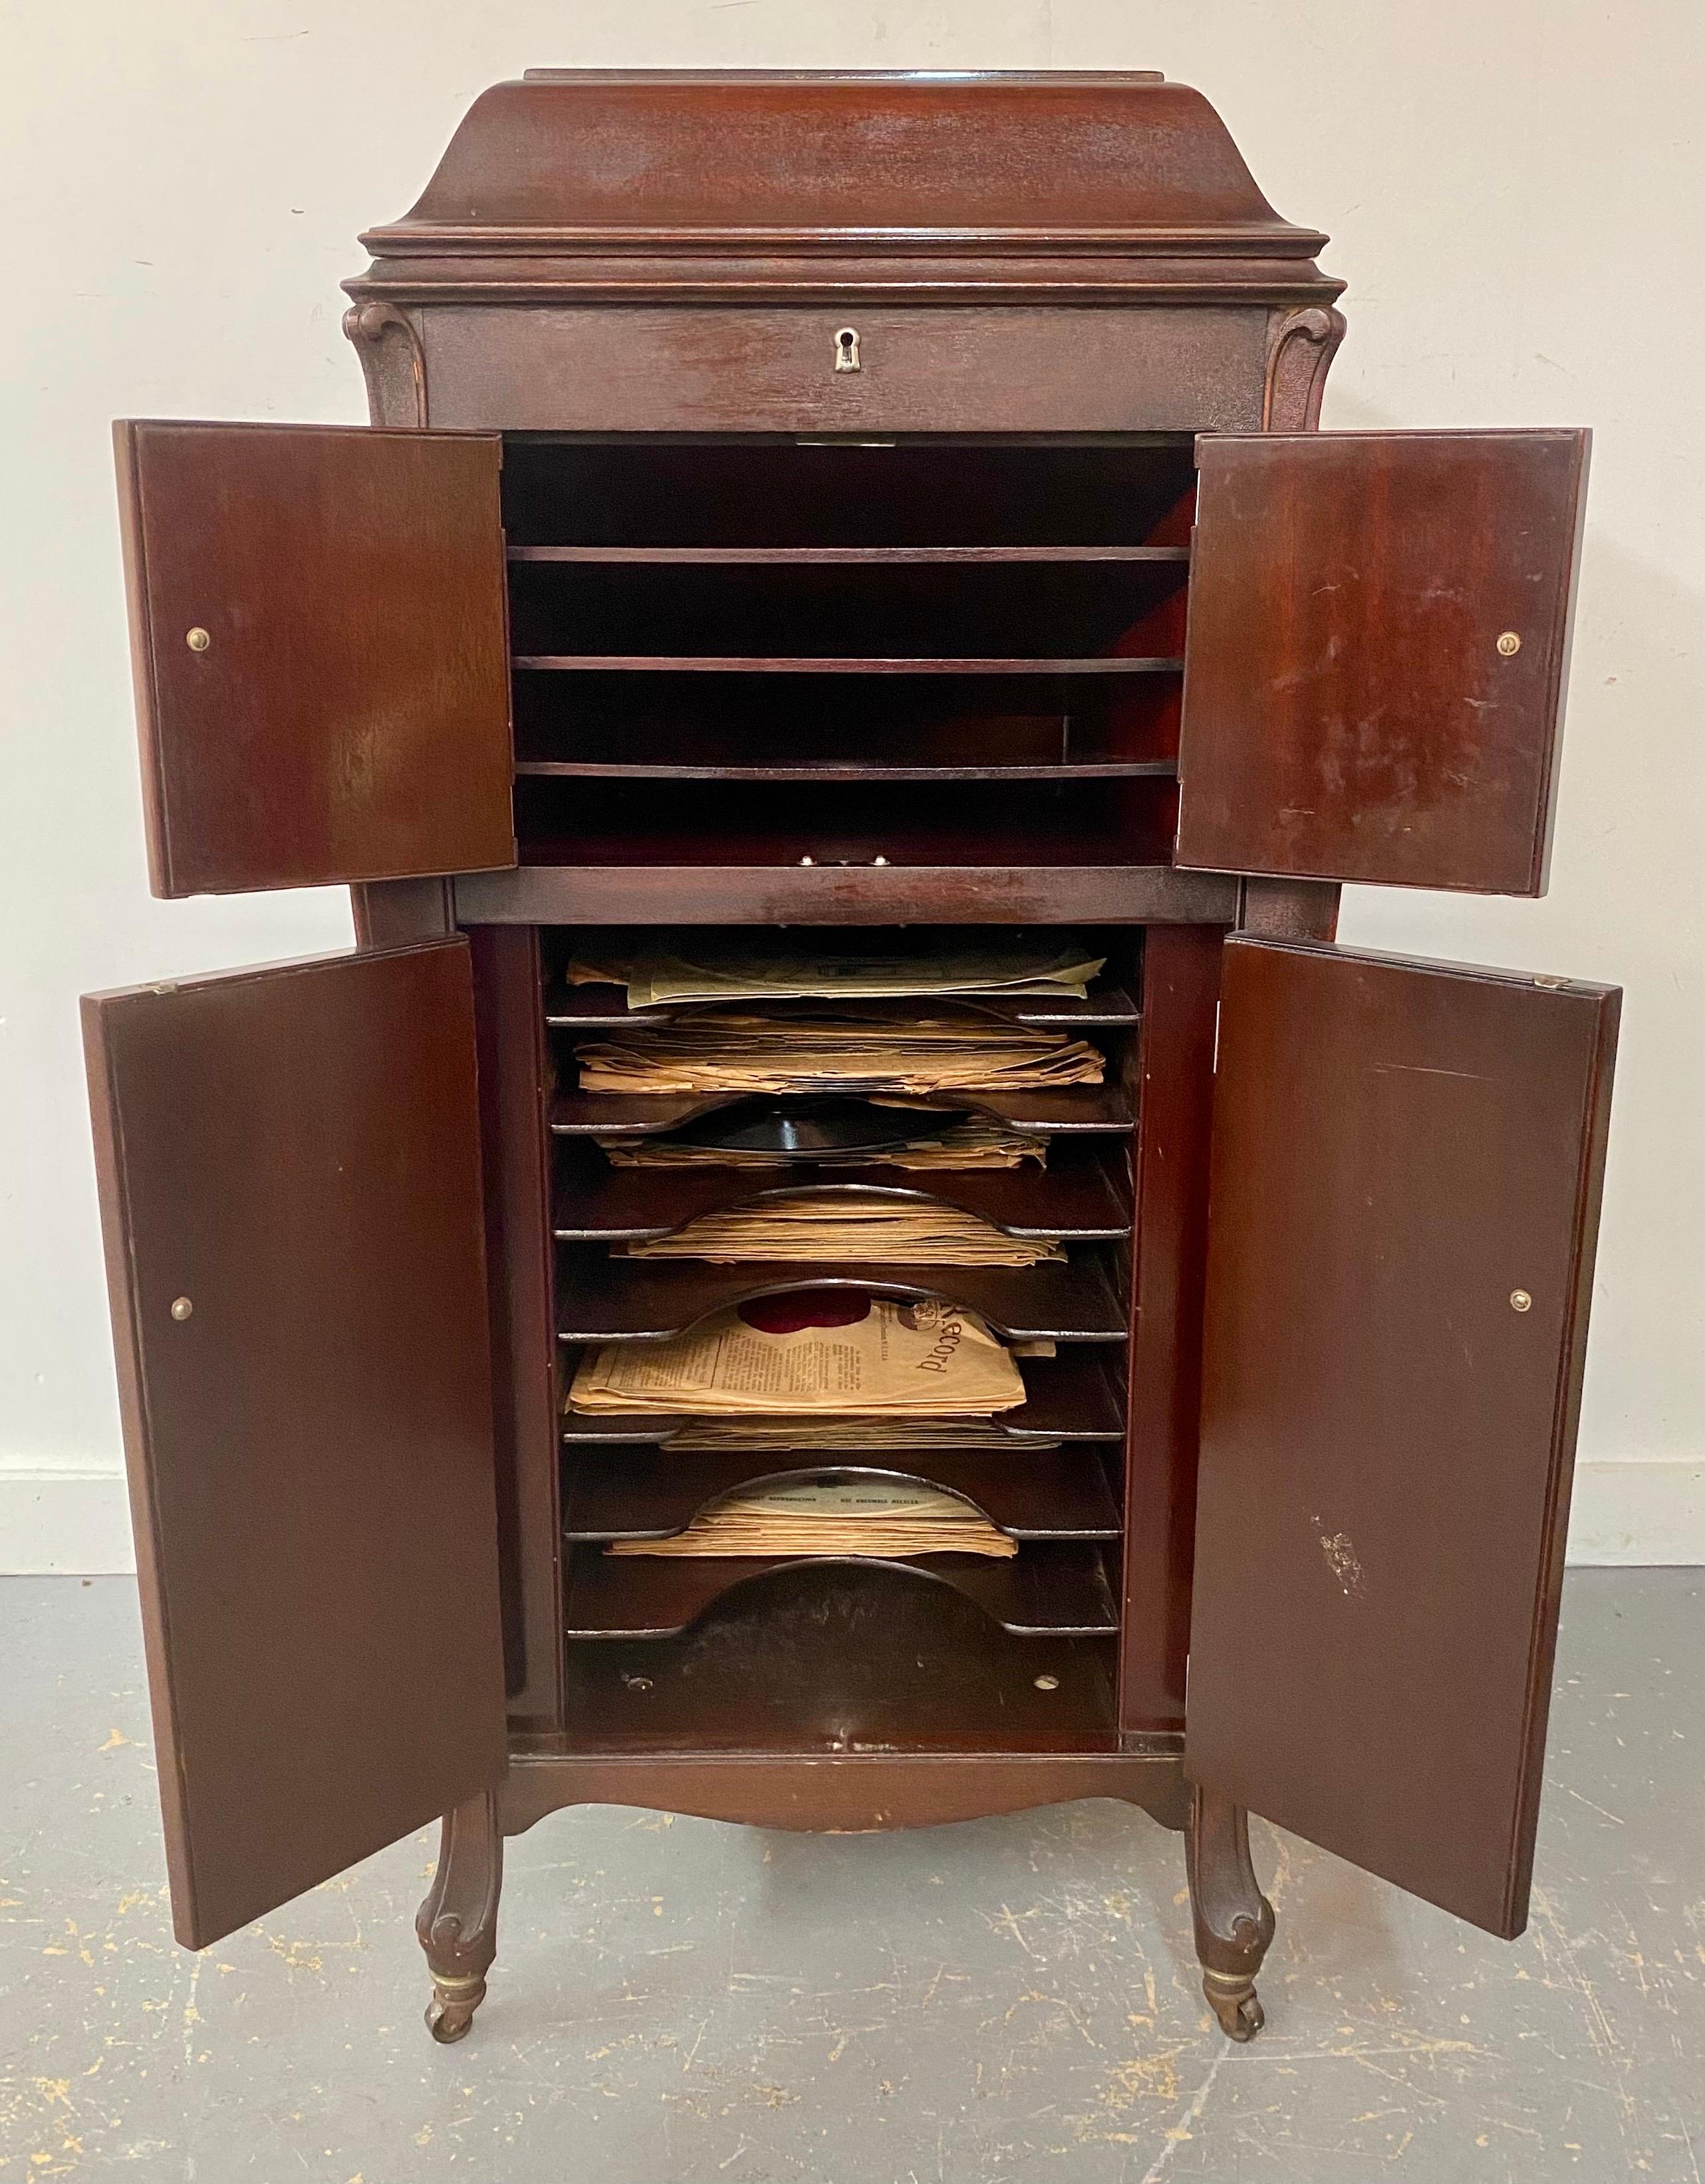 Antique VictorLA Model VV-XI Phonograph in Queen Anne Style Mahogany Cabinet  In Good Condition For Sale In Plainview, NY